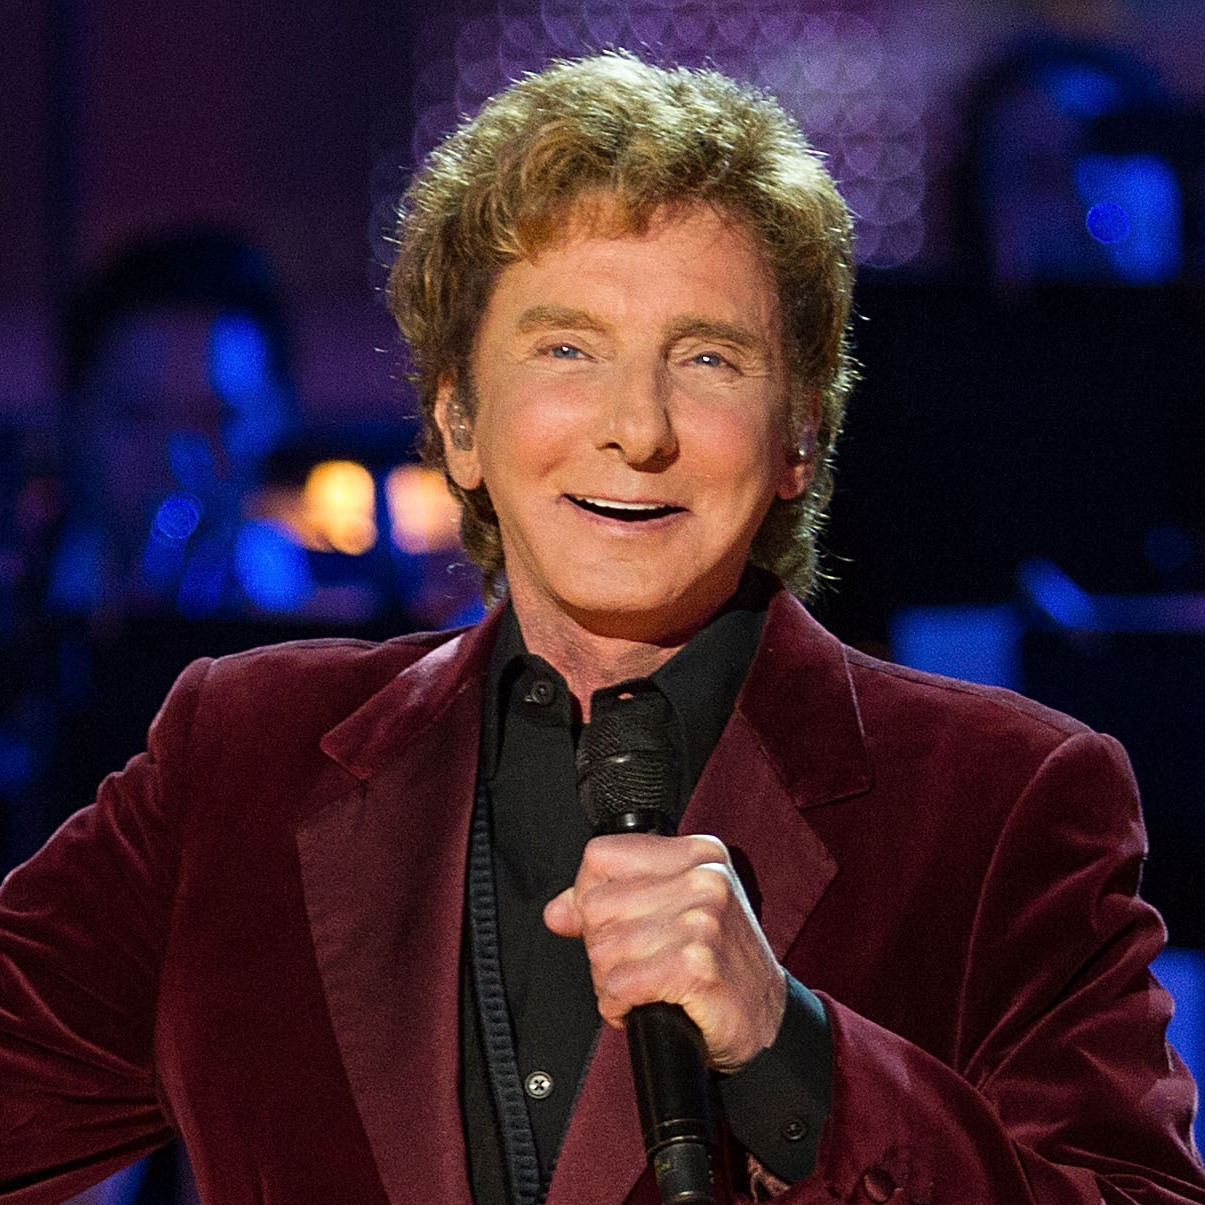 Barry Manilow #6